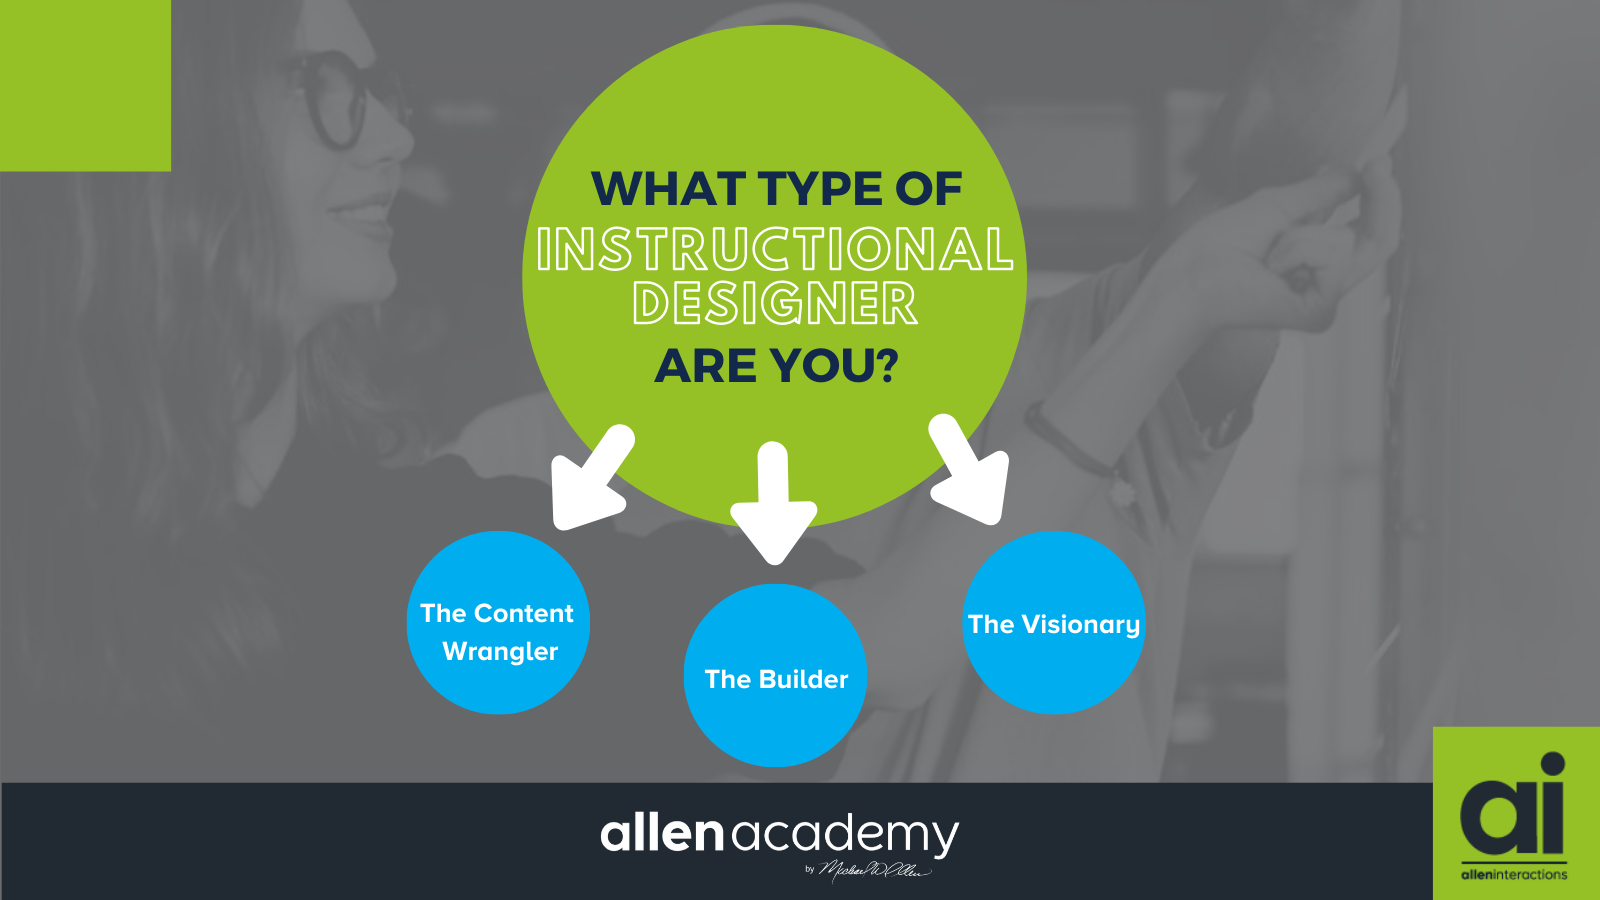 What Type of Instructional Designer Are You?